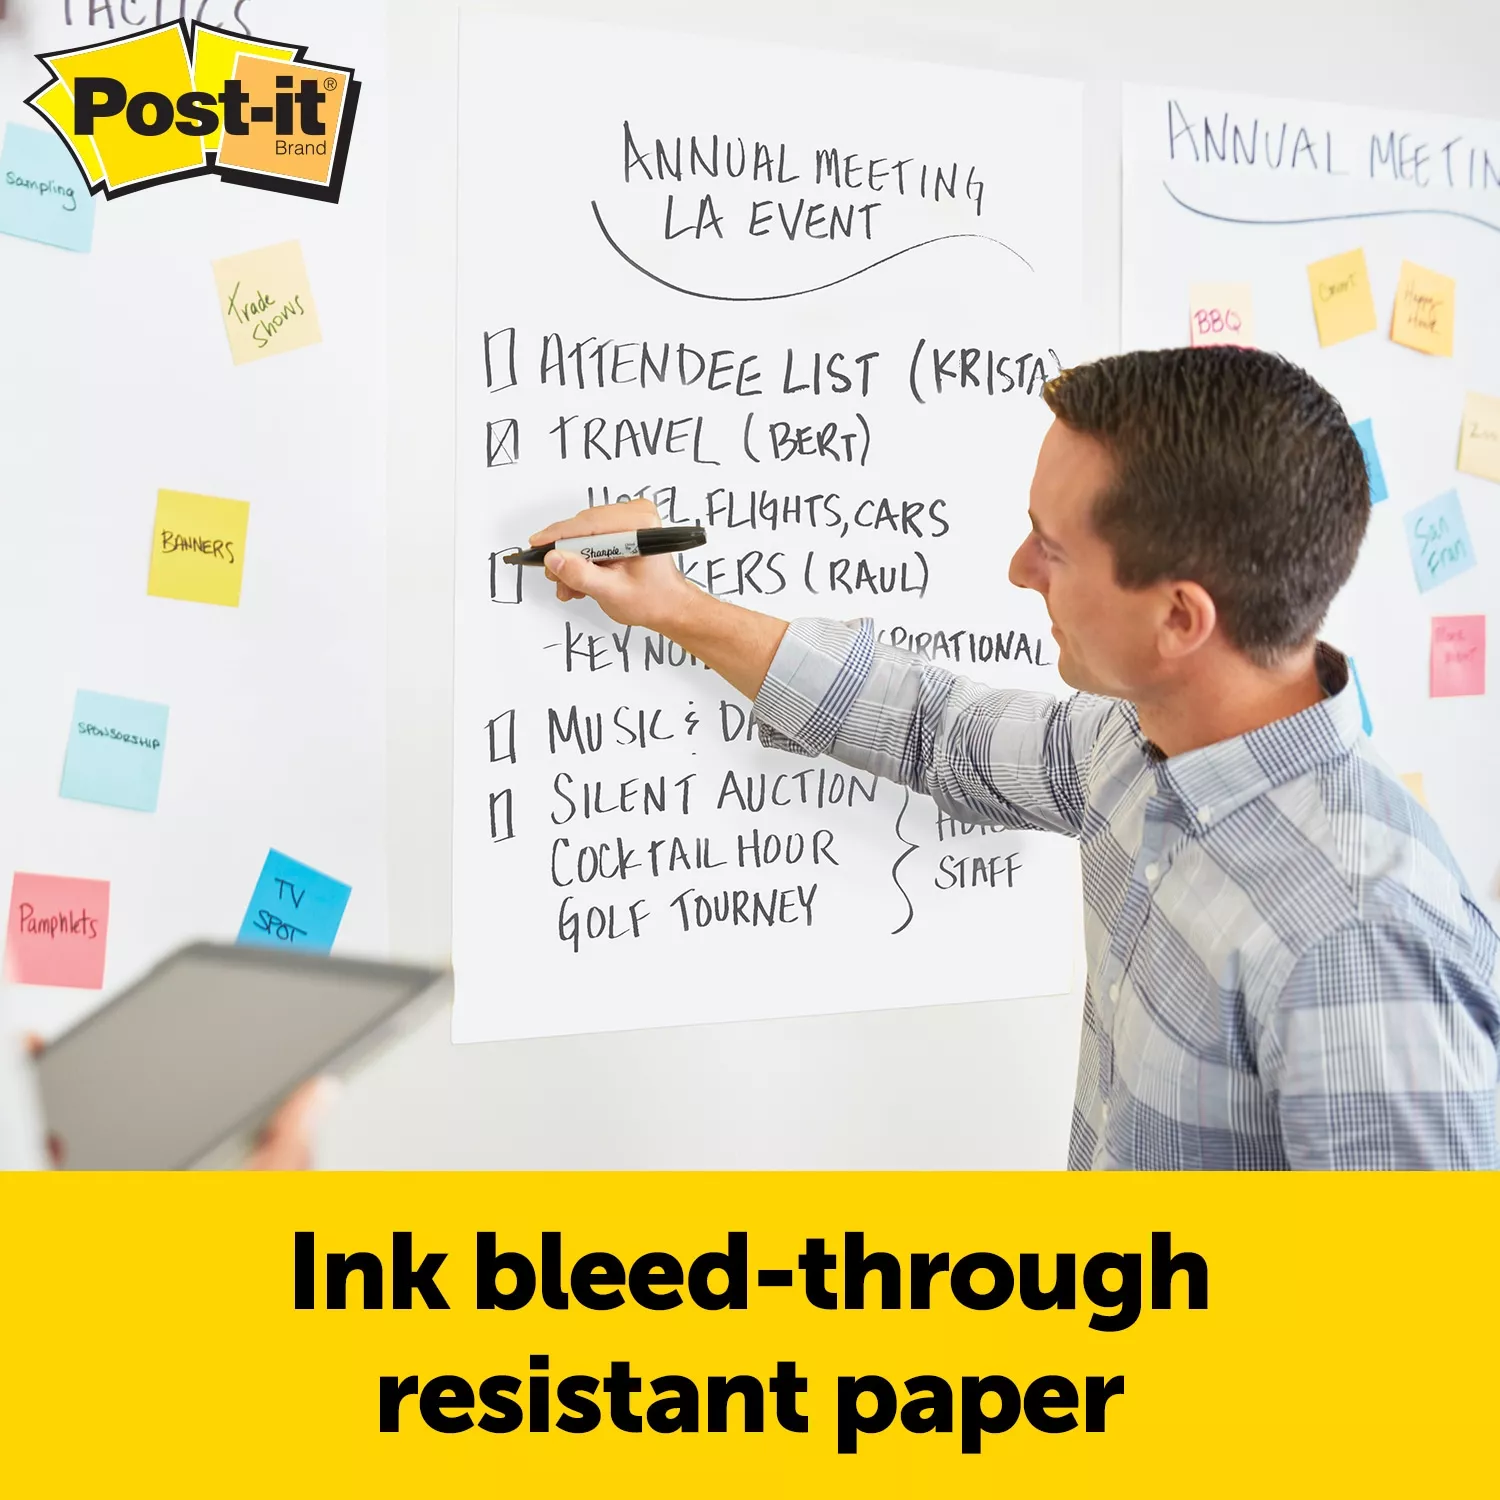 Product Number 566 | Post-it® Self-Stick Wall Pad 566